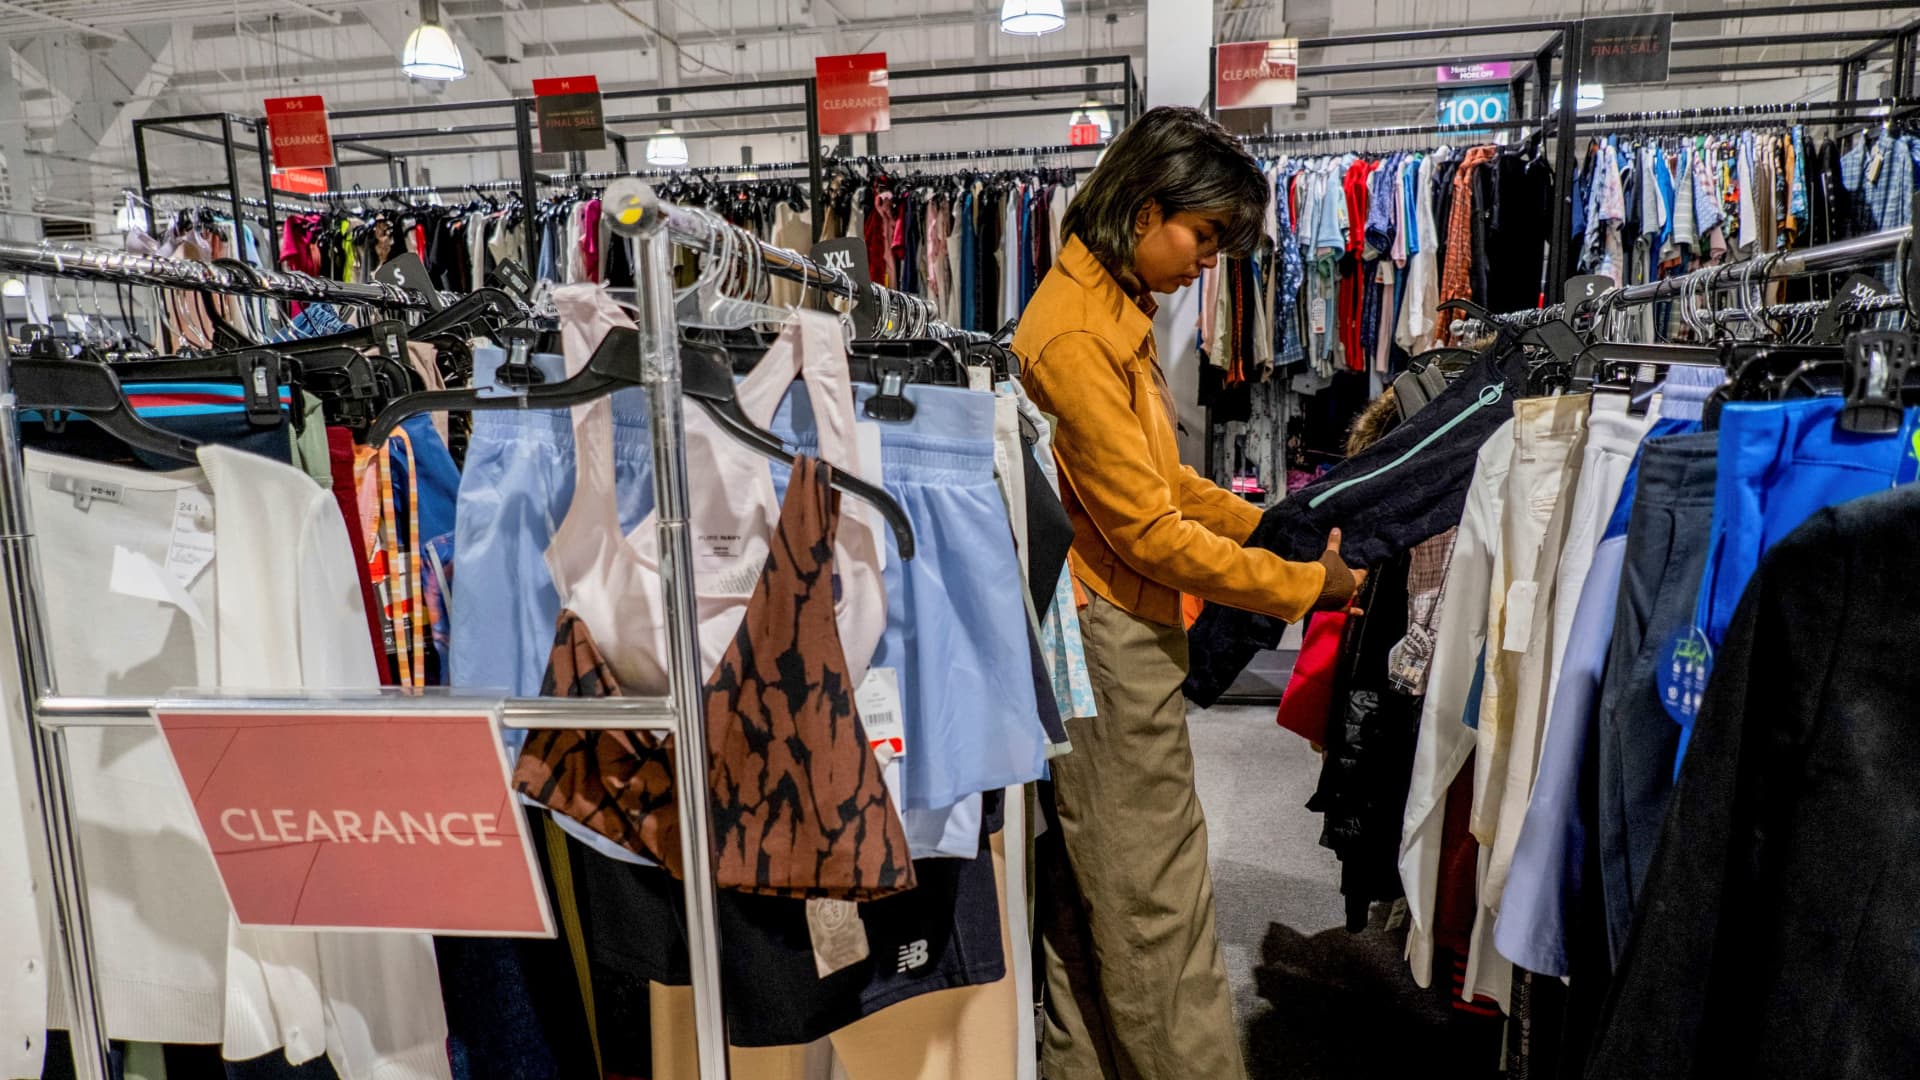 Consumer prices rose a more-than-expected 0.3% in December, pushing the year-over-year pace to 3.4%